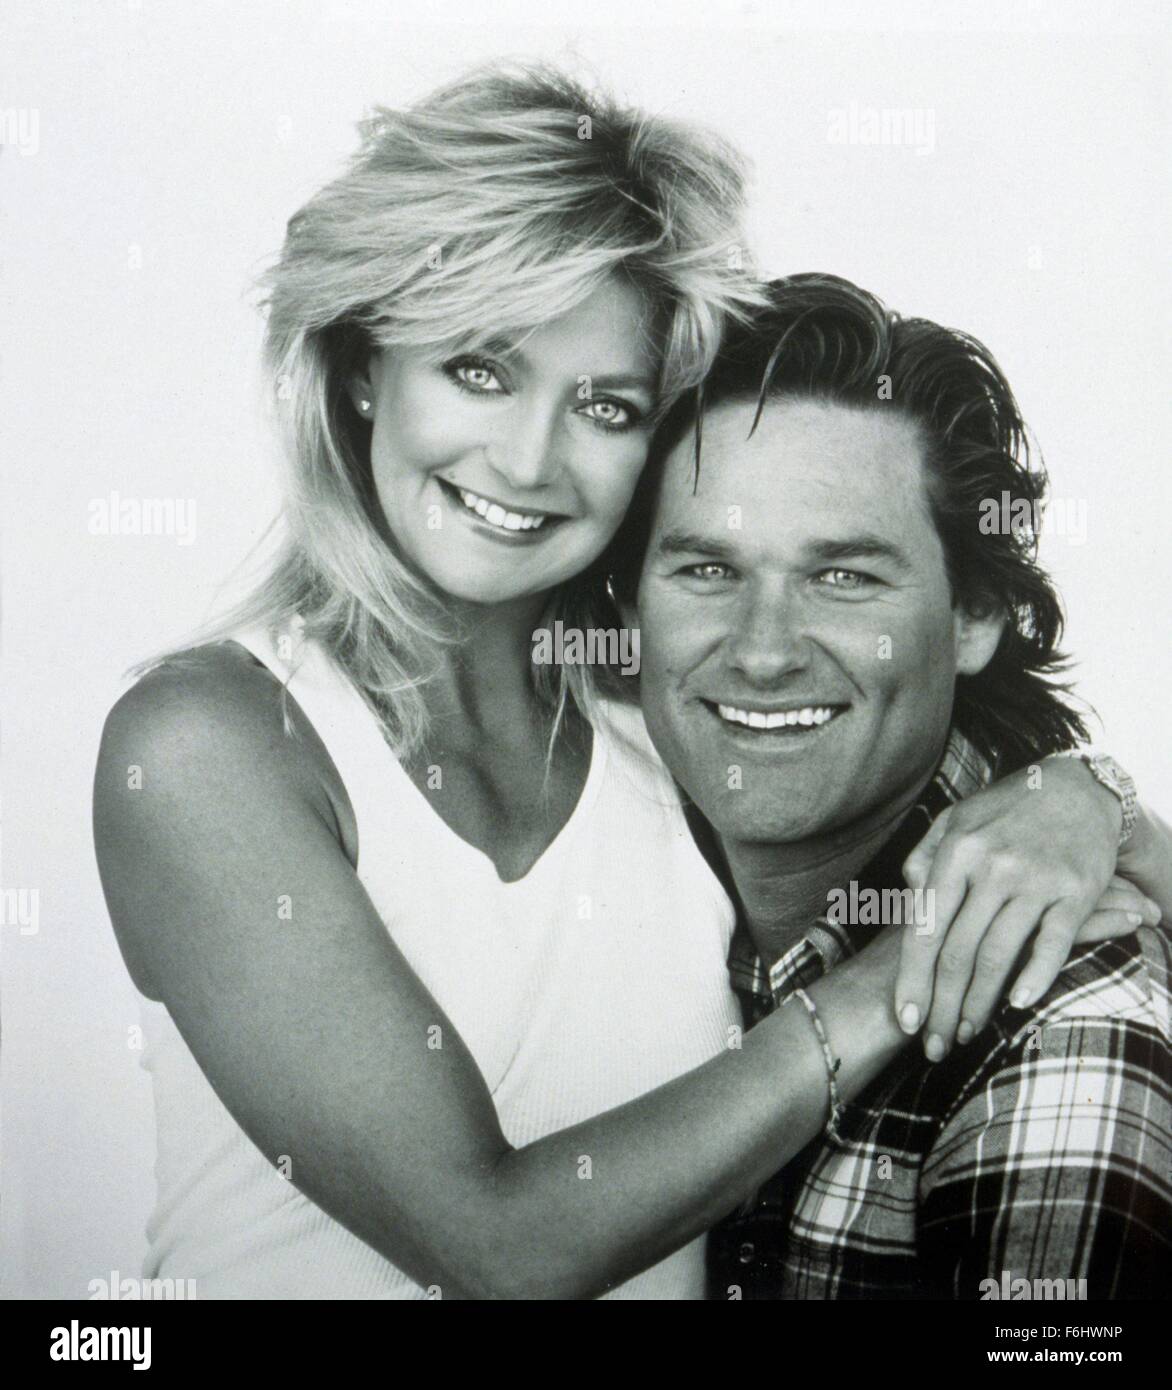 1987, Film Title: OVERBOARD, Director: GARRY MARSHALL, Studio: MGM, Pictured: 1987, GOLDIE HAWN, KURT RUSSELL, SMILING, MARRIED, COUPLE. (Credit Image: SNAP) Stock Photo